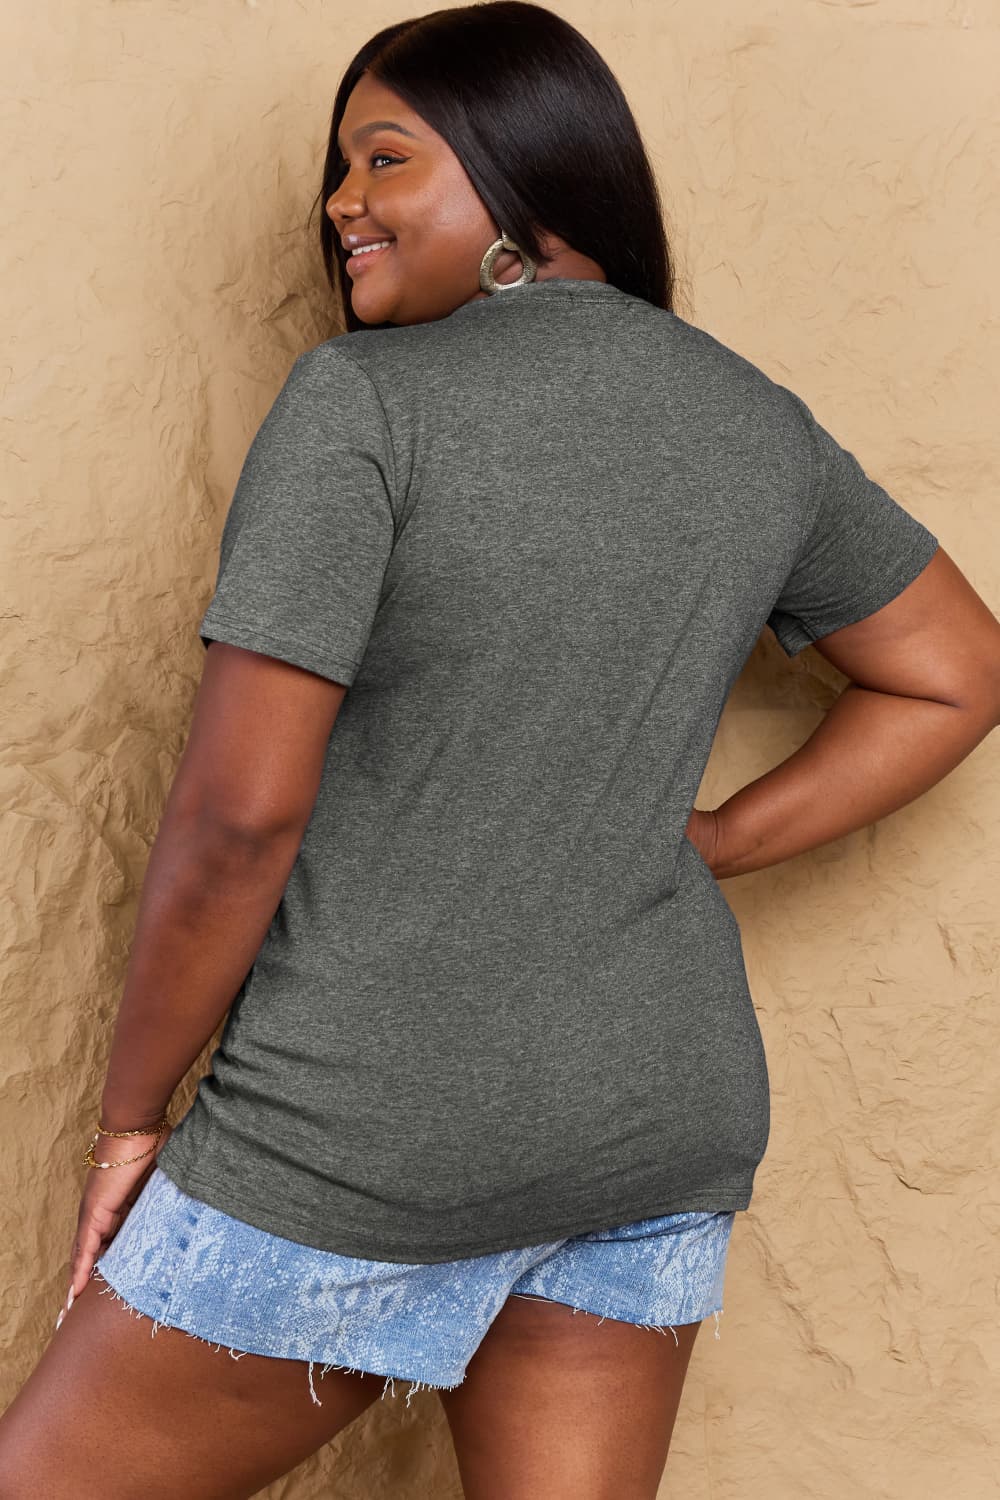 Dim Gray Simply Love Full Size BOO Graphic Cotton Tee Sentient Beauty Fashions Apparel & Accessories